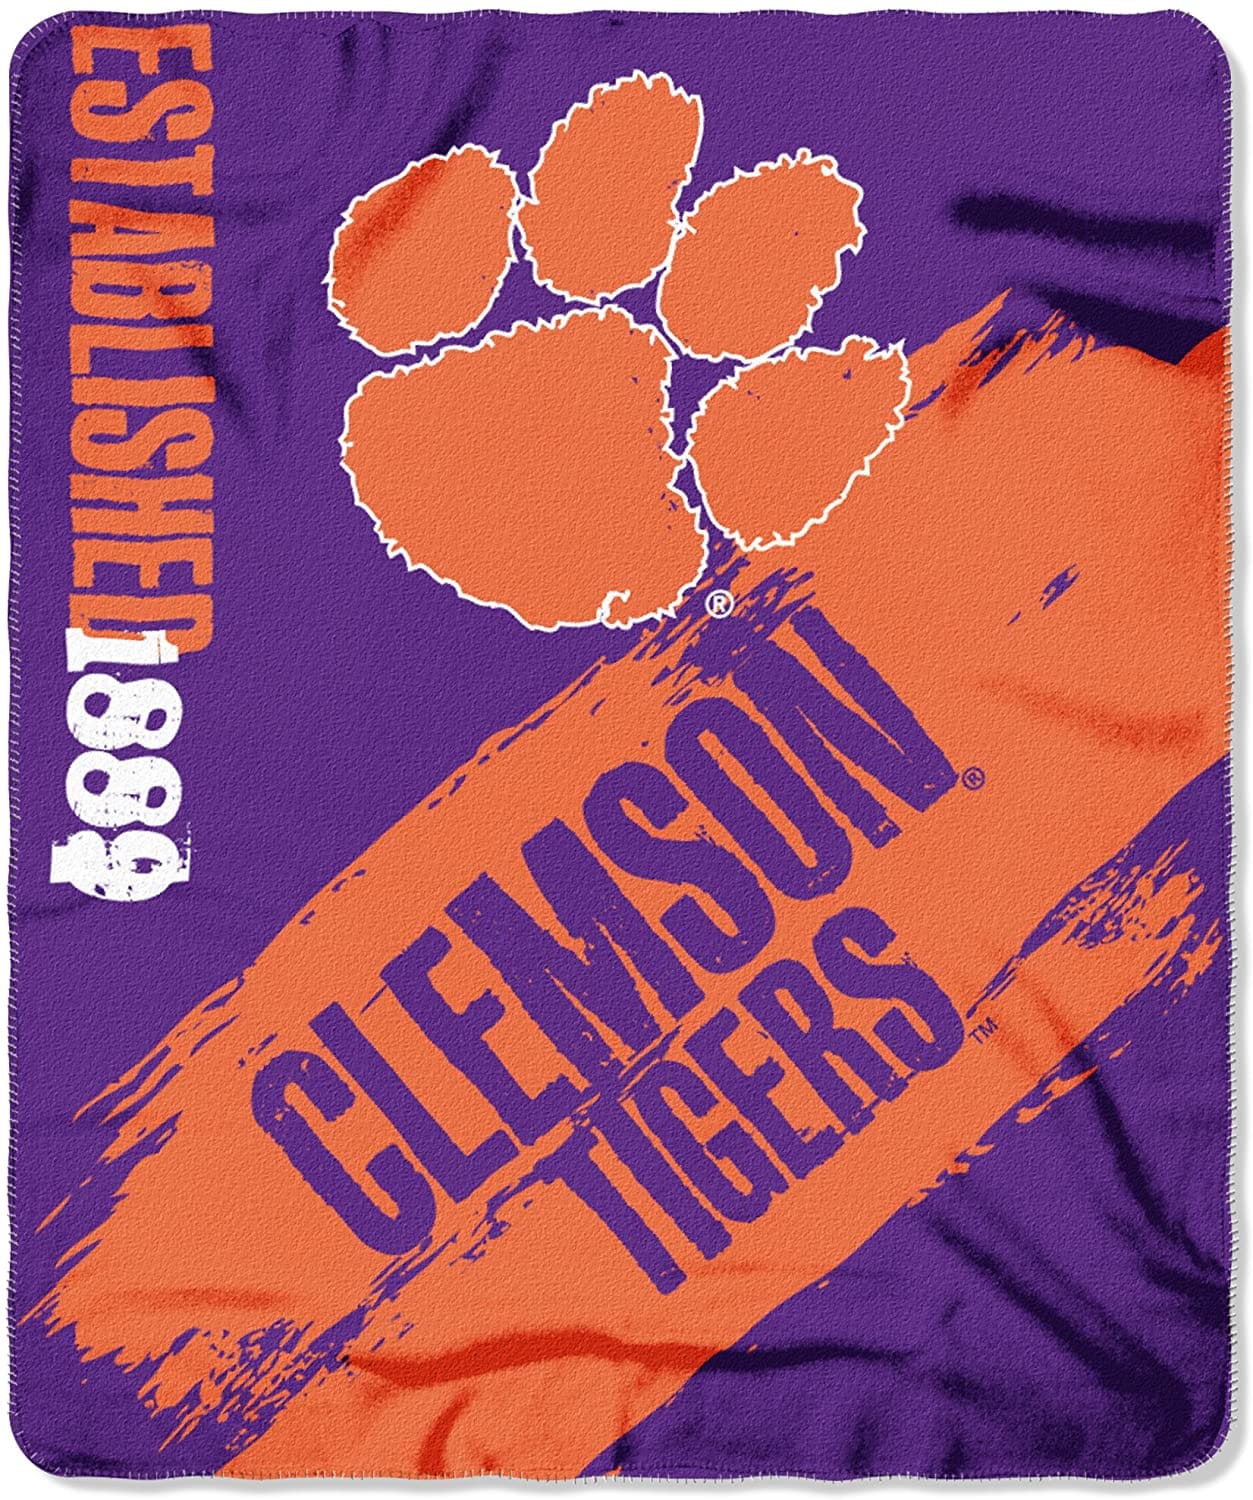 Officially Licensed Ncaa Printed Throw Clemson Tigers Fleece Blanket